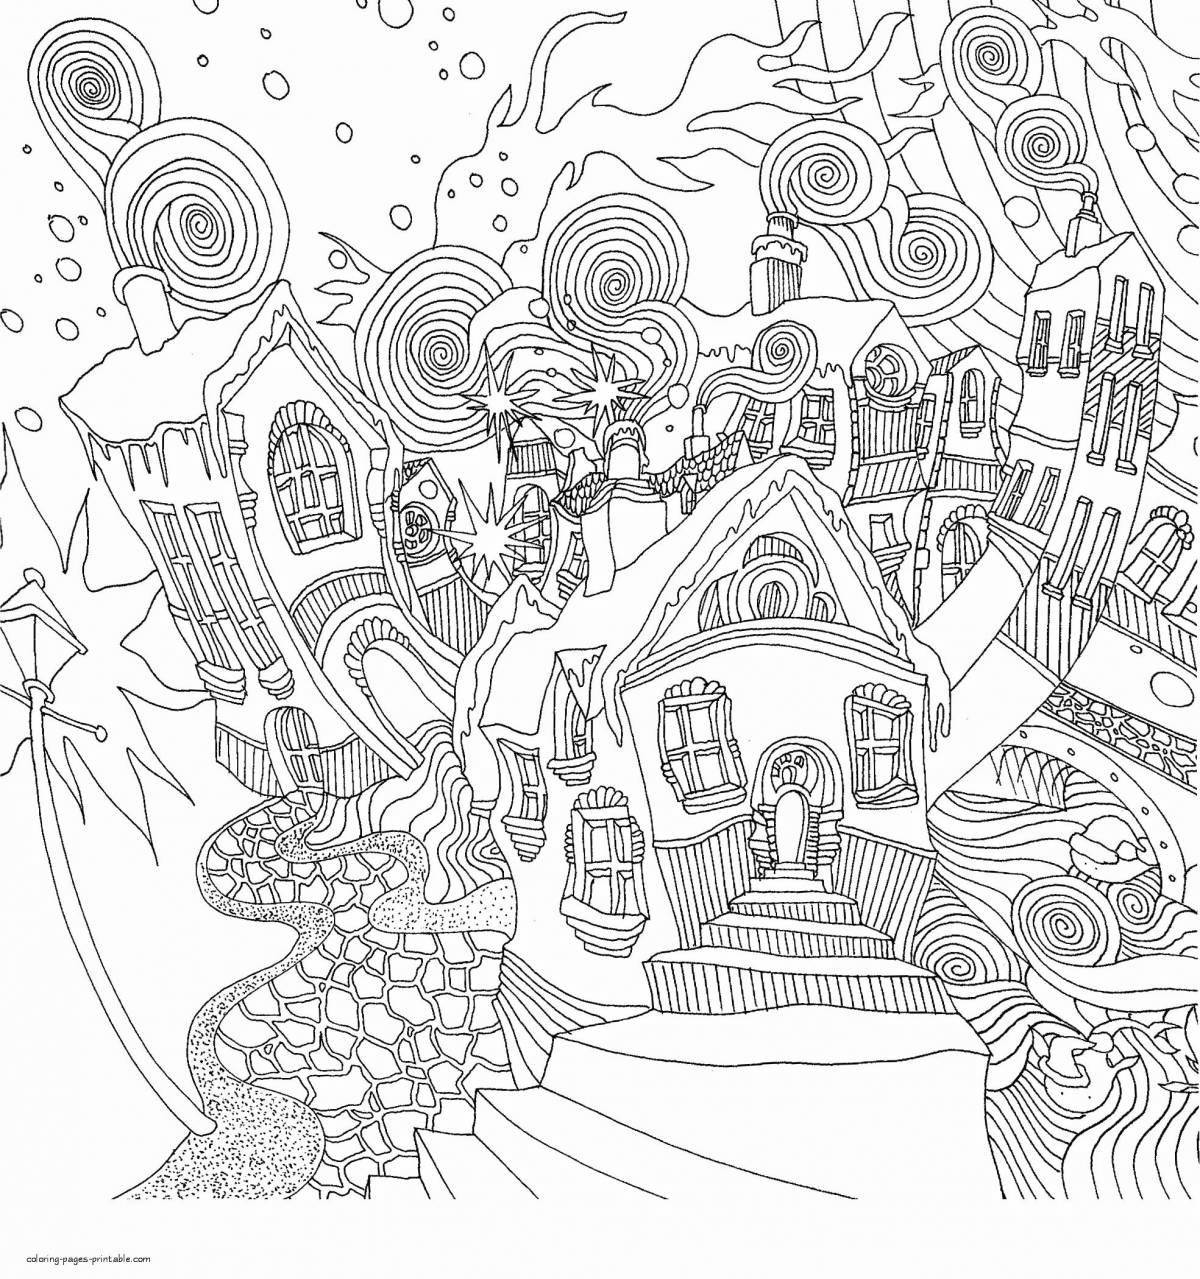 Radiant coloring page relax magic cities of the world